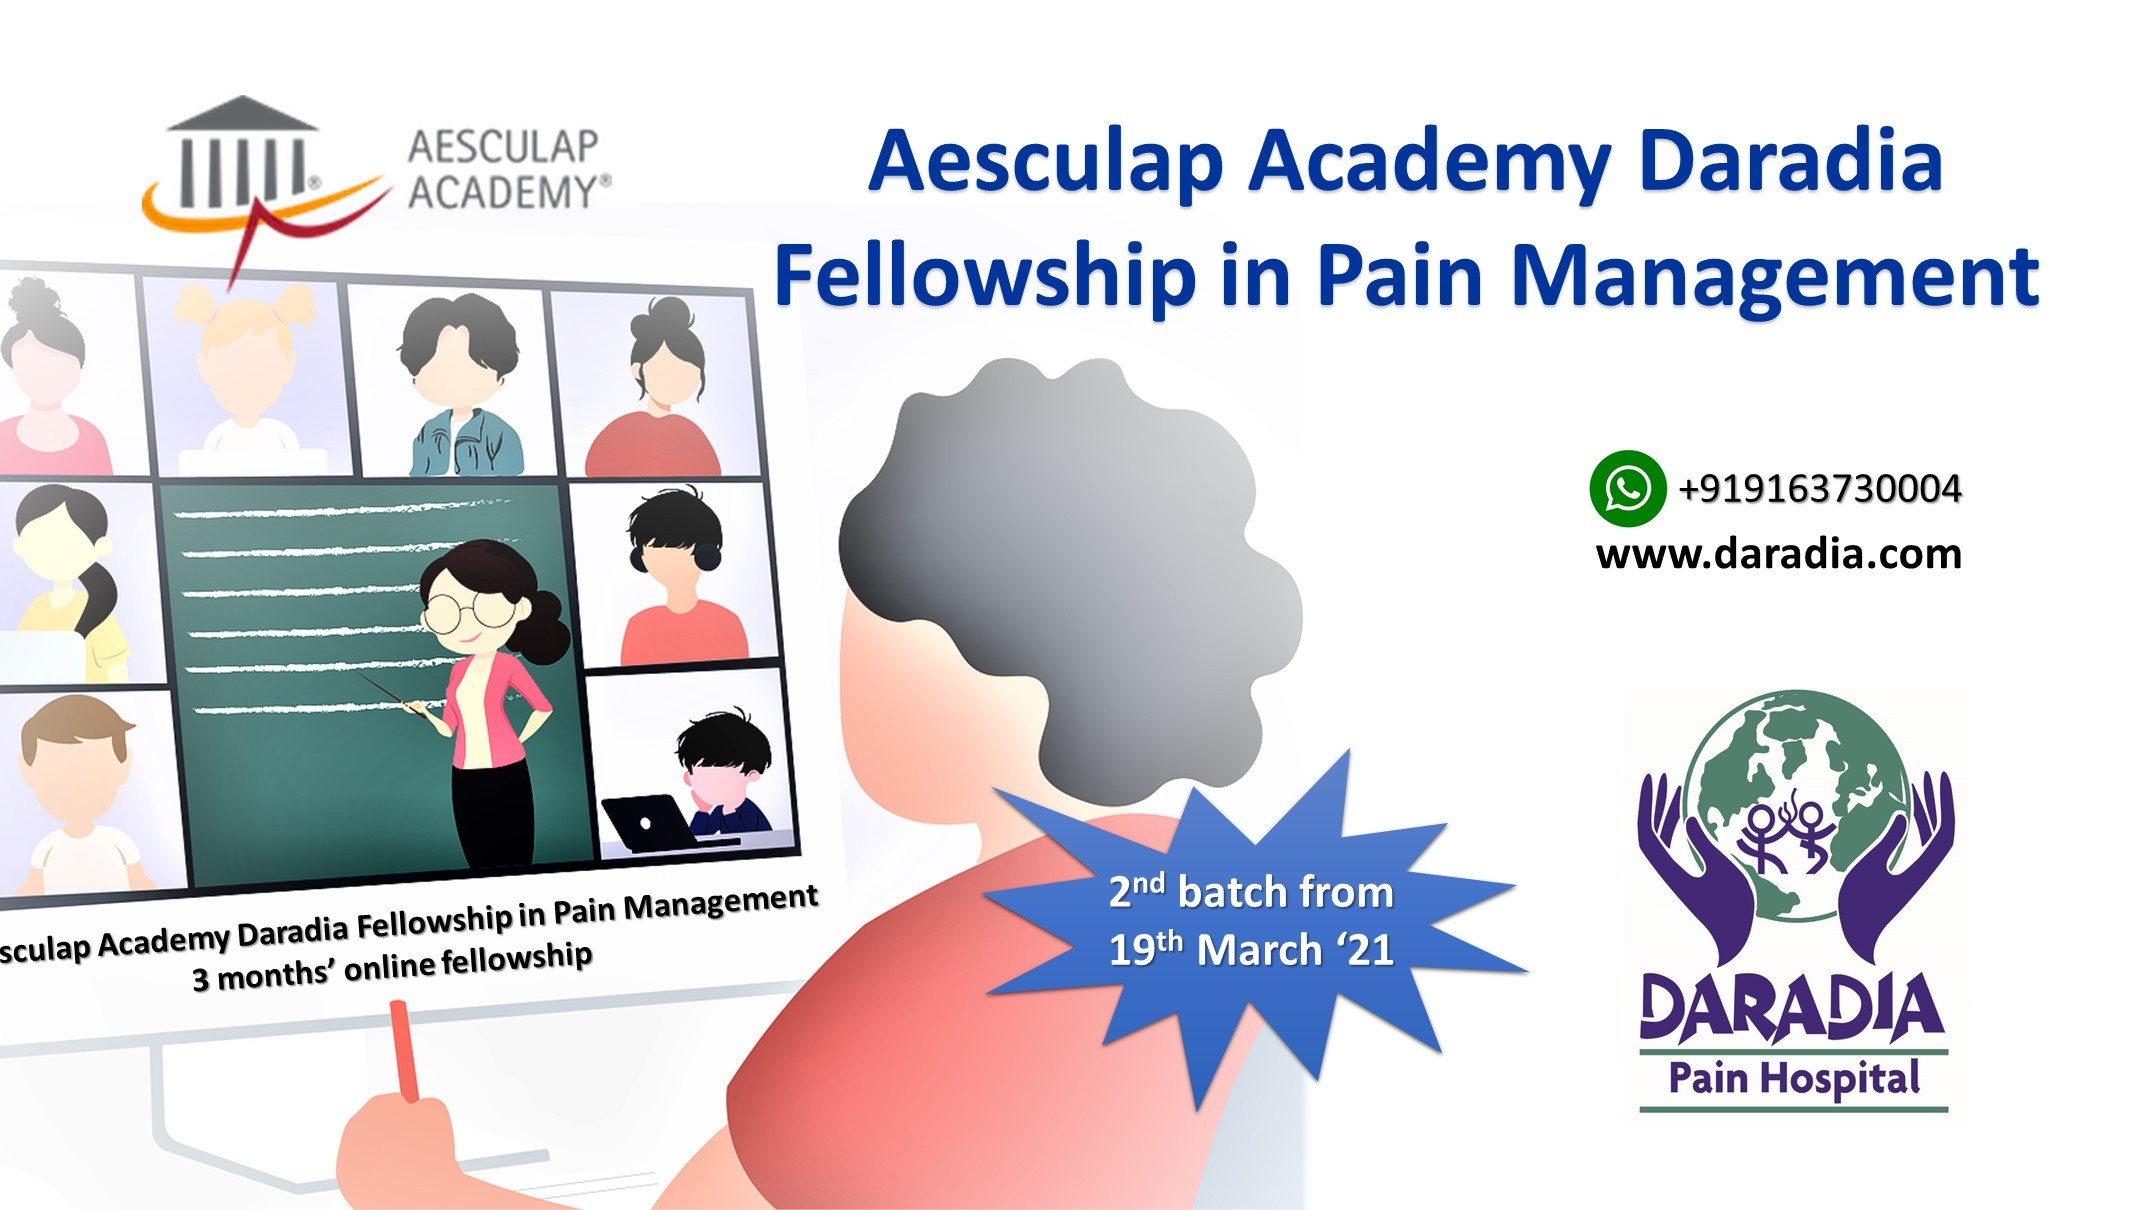 Online fellowship in pain management